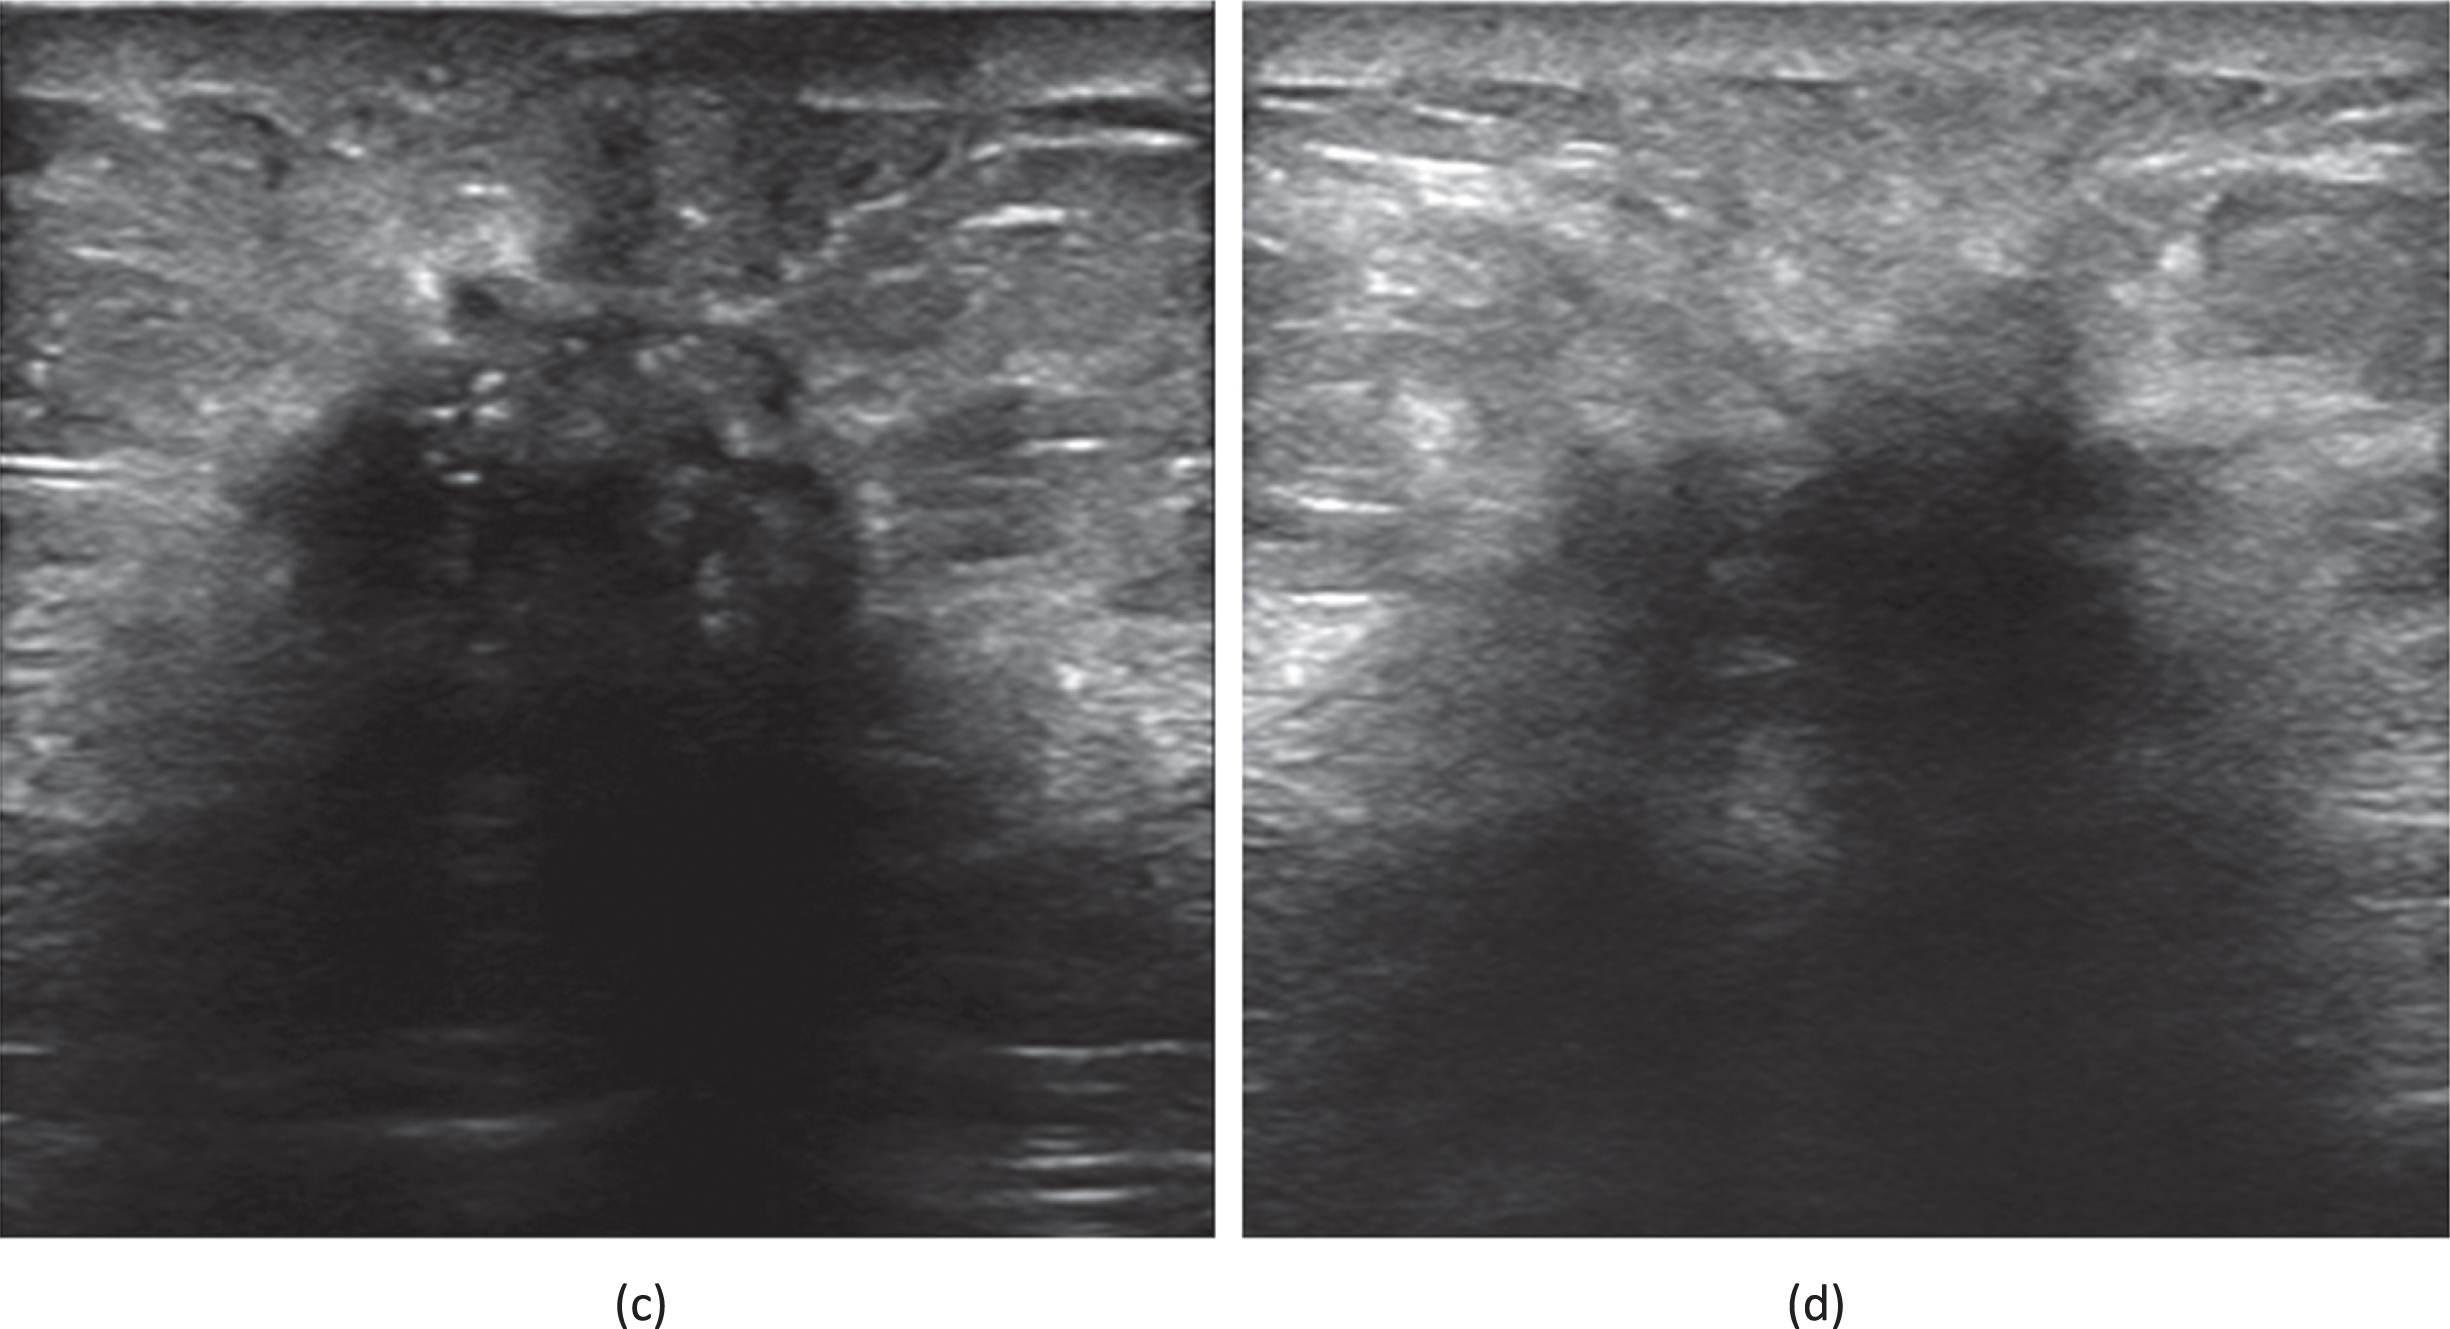 (c) A 69-year-old female patient who had been diagnosed with an invasive carcinoma in the left breast. Ultrasound of left breast showing a hypoechoic nodule with a maximum diameter of 17 mm with ill defined margins, ultrasound attenuation in the posterior fields are seen within the nodule. The patient had left axillary lymph node metastasis. (d) A 66-year-old female patient who had been diagnosed with a non-special invasive carcinoma grade II in the left breast. Ultrasound of left breast showing a hypoechoic nodule with a maximum diameter of 28 mm with ill defined margins, ultrasound attenuation in the posterior fields are seen within the nodule. The patient had left axillary lymph node metastasis. Immunohistochemistry showed that ER(+80%), PR(+20%), HER2(0), KI67(+20%).